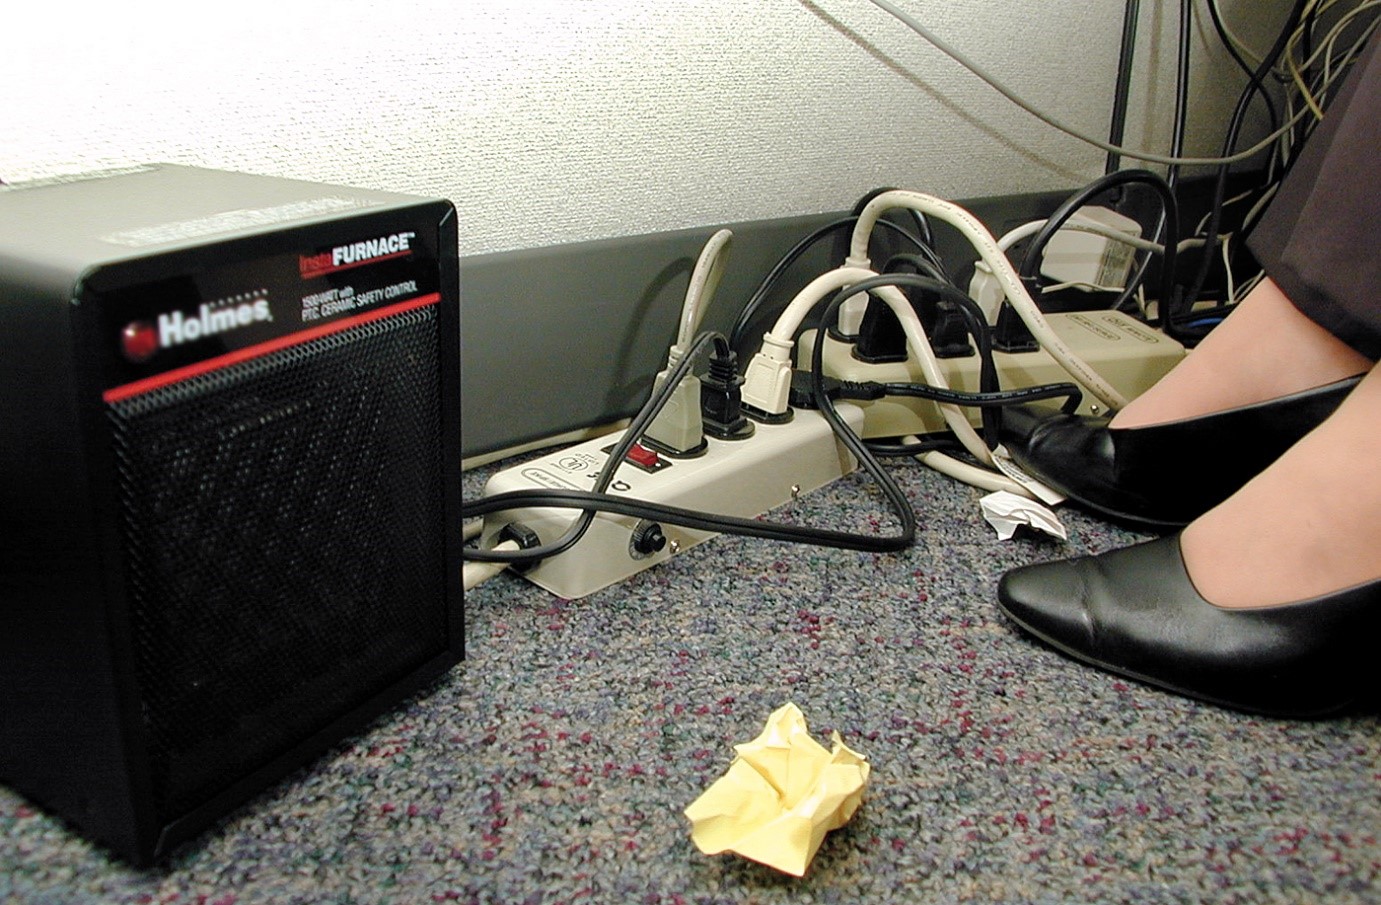 Image shows overloaded plug sockets in office.